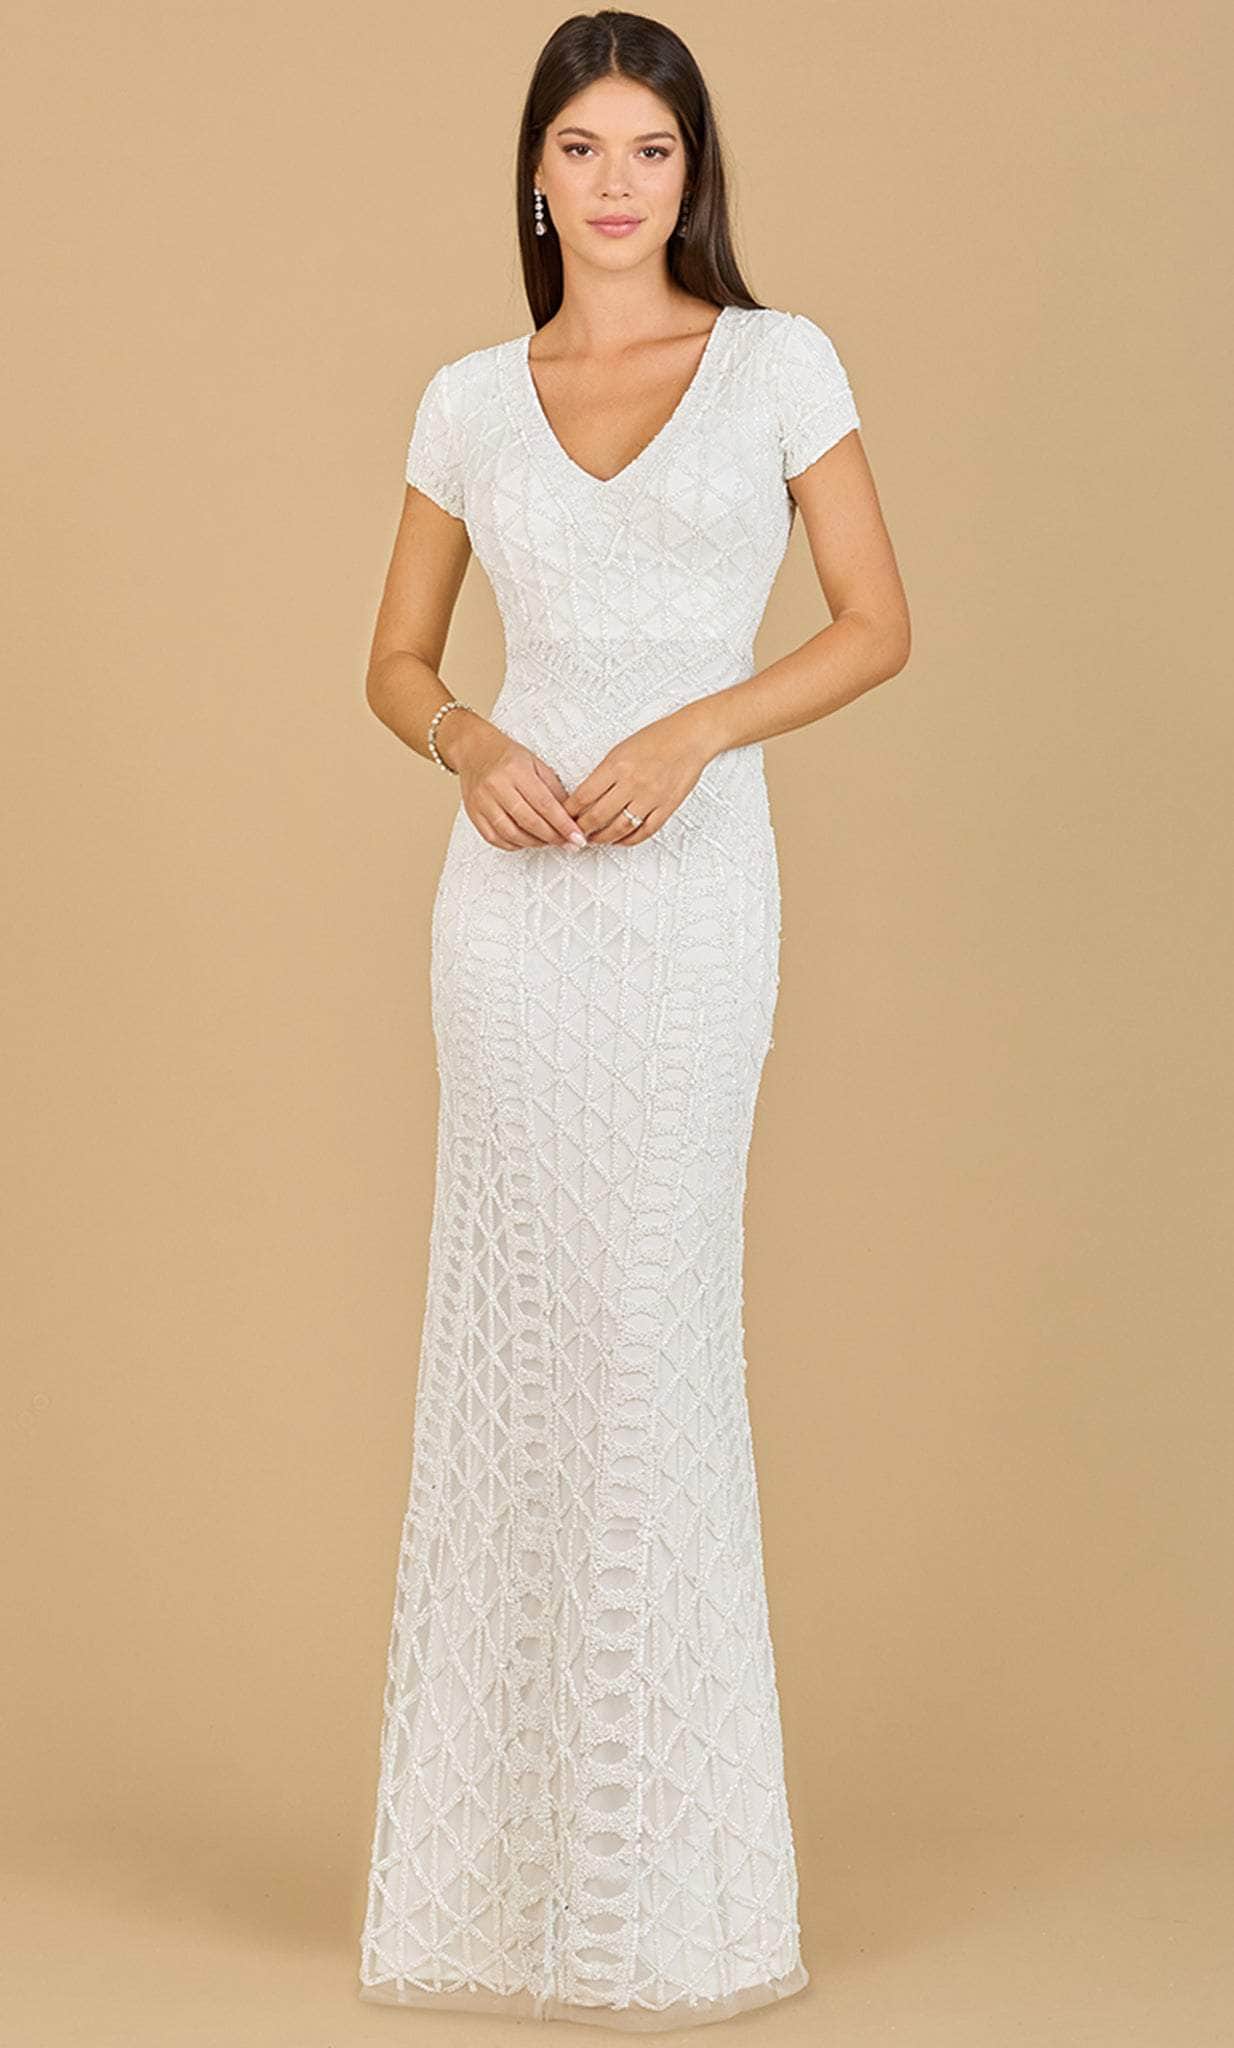 Image of Lara Dresses 51141 - Embroidered Lace Formal Dress